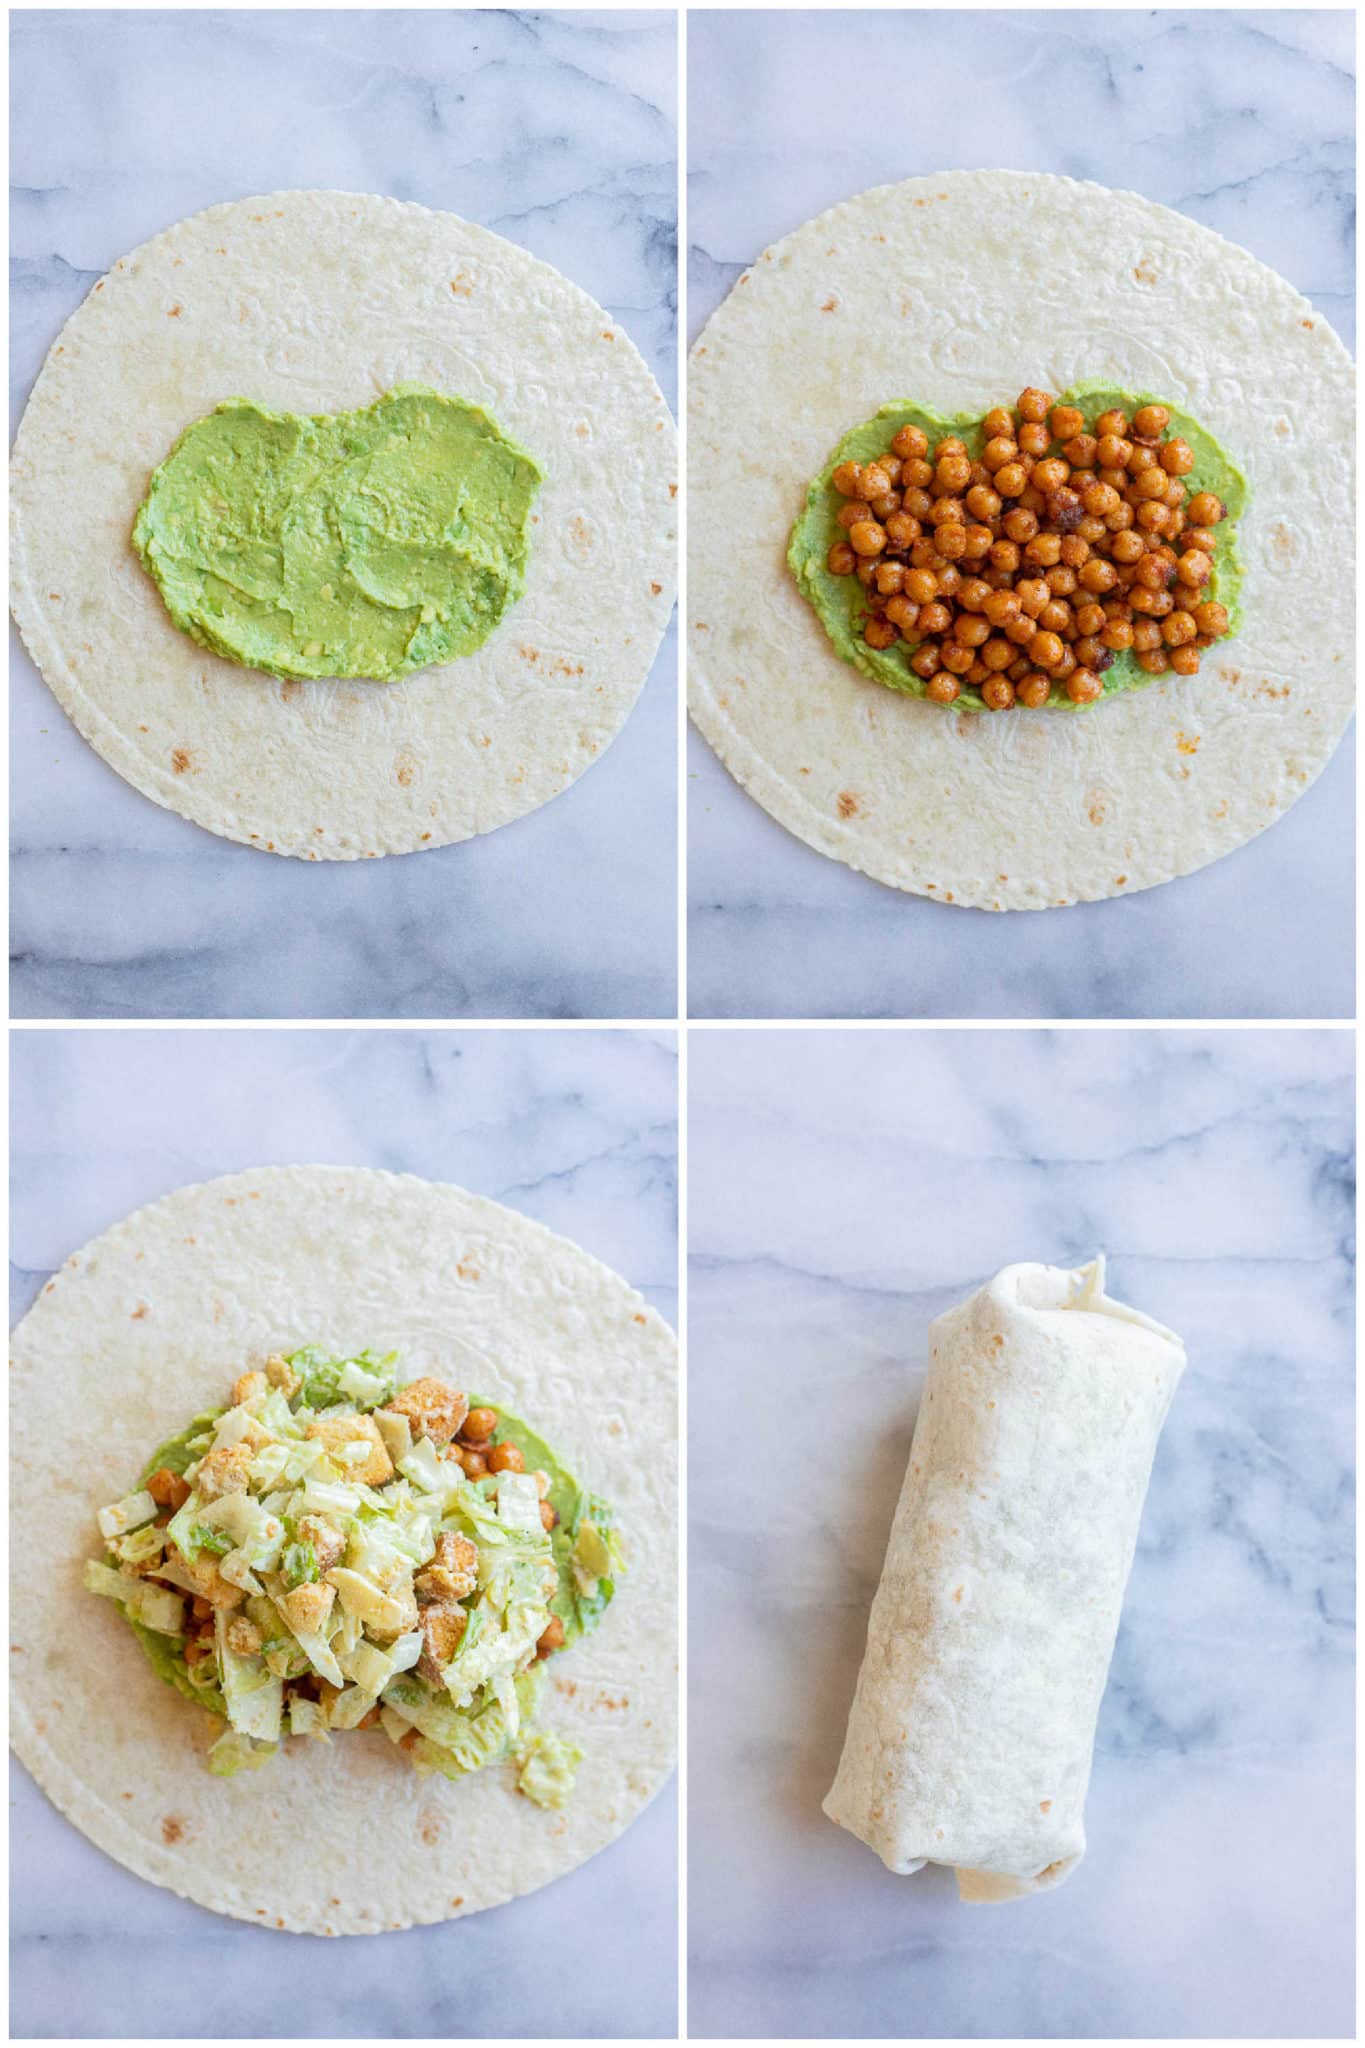 showing how to put together and roll a chickpea Caesar salad wrap in a tortilla